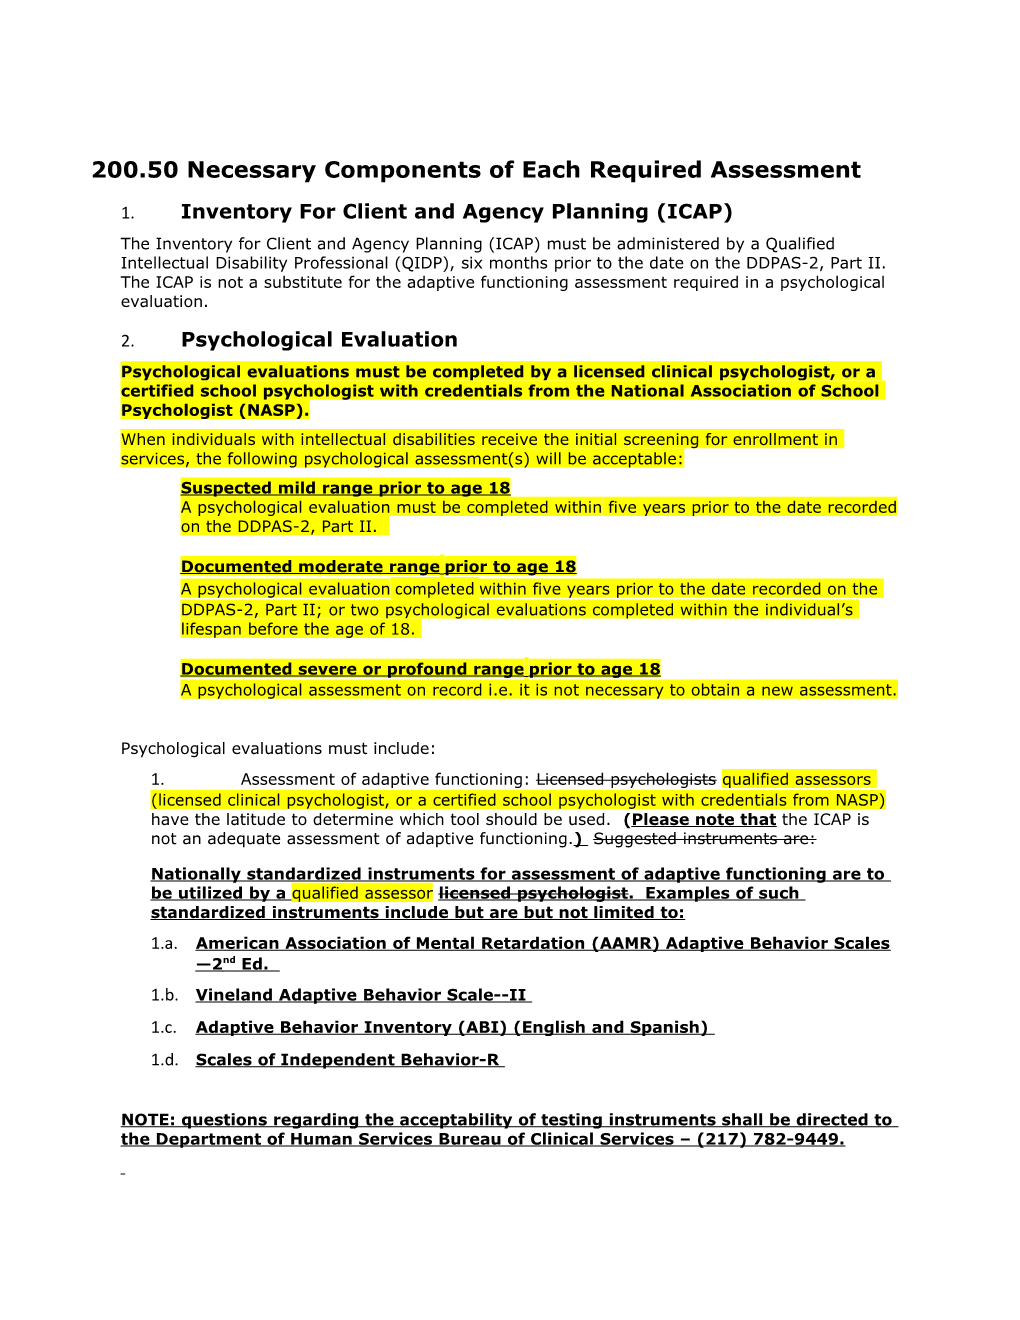 200.50Necessary Components of Each Required Assessment